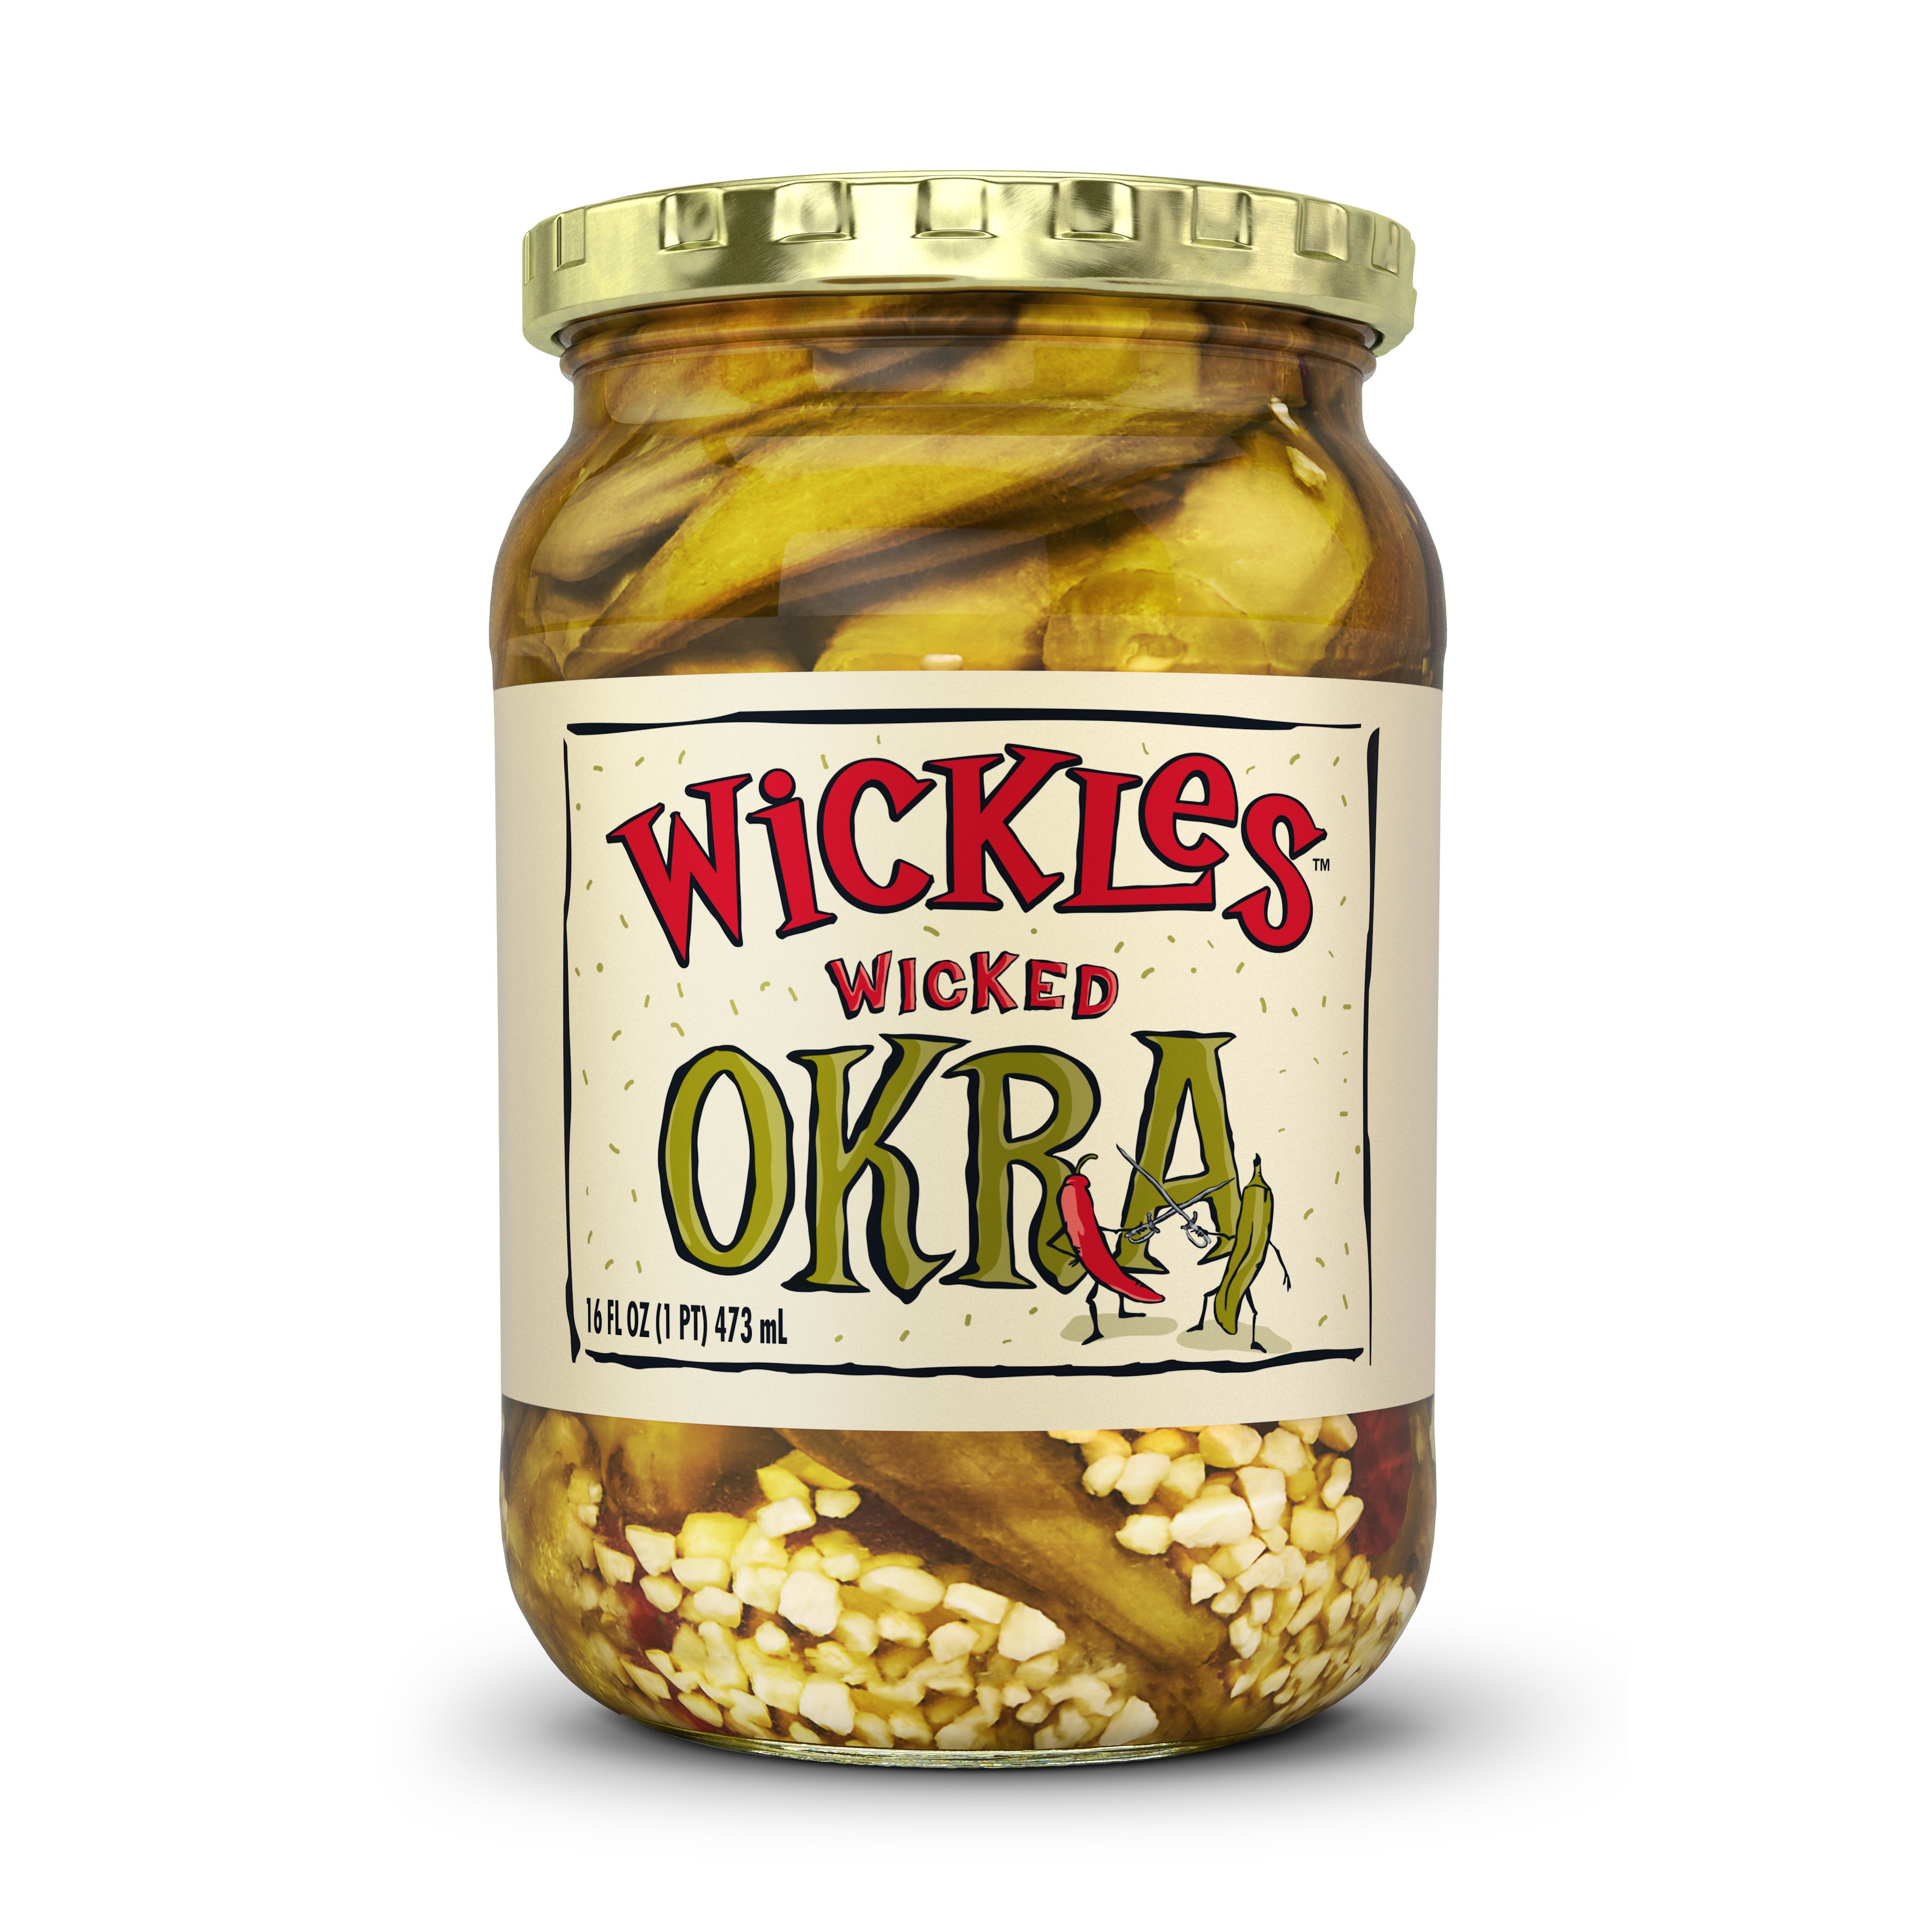 Wickles Wicked Pickle Chips, 16 oz (Pack - 3)